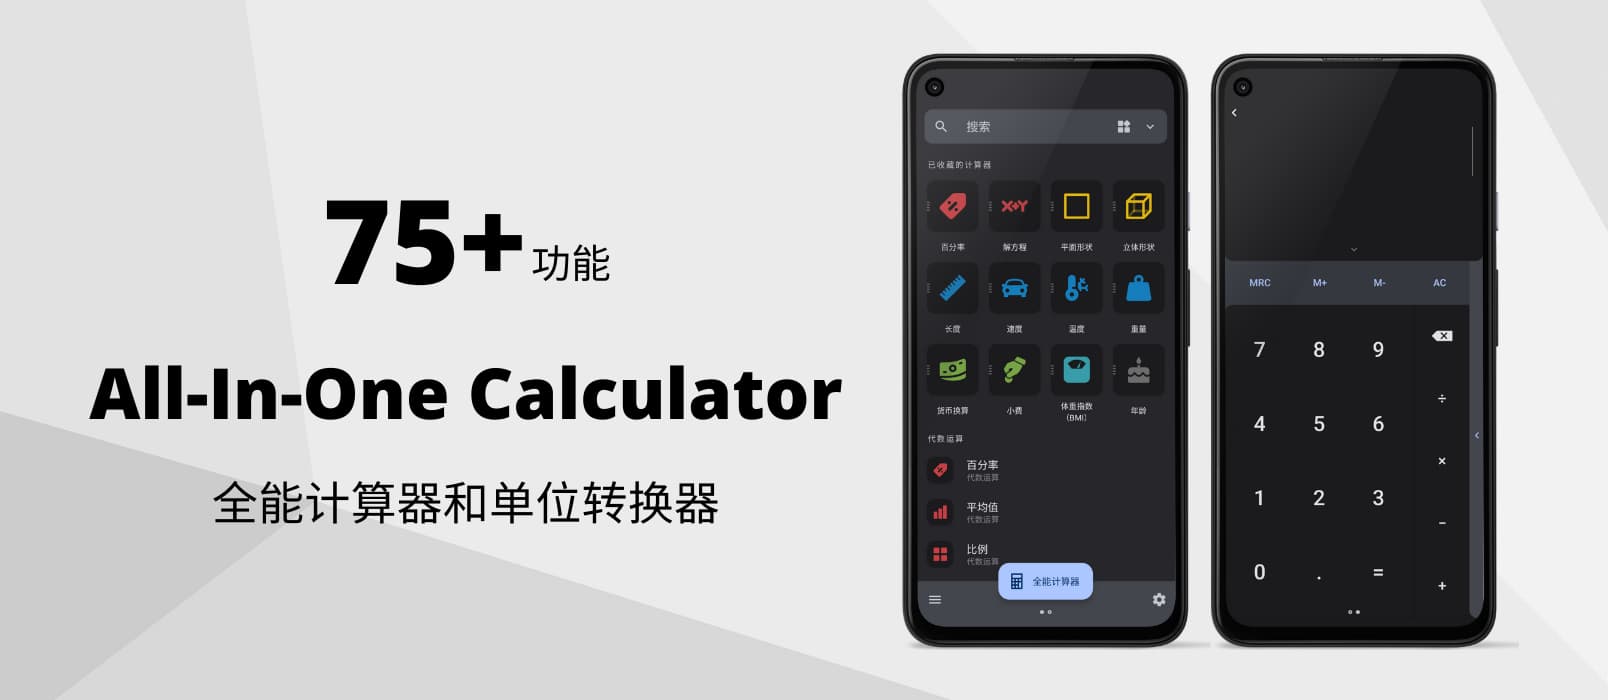 All-In-One Calculator - 75+ 功能，全能计算器和单位转换器[Android]